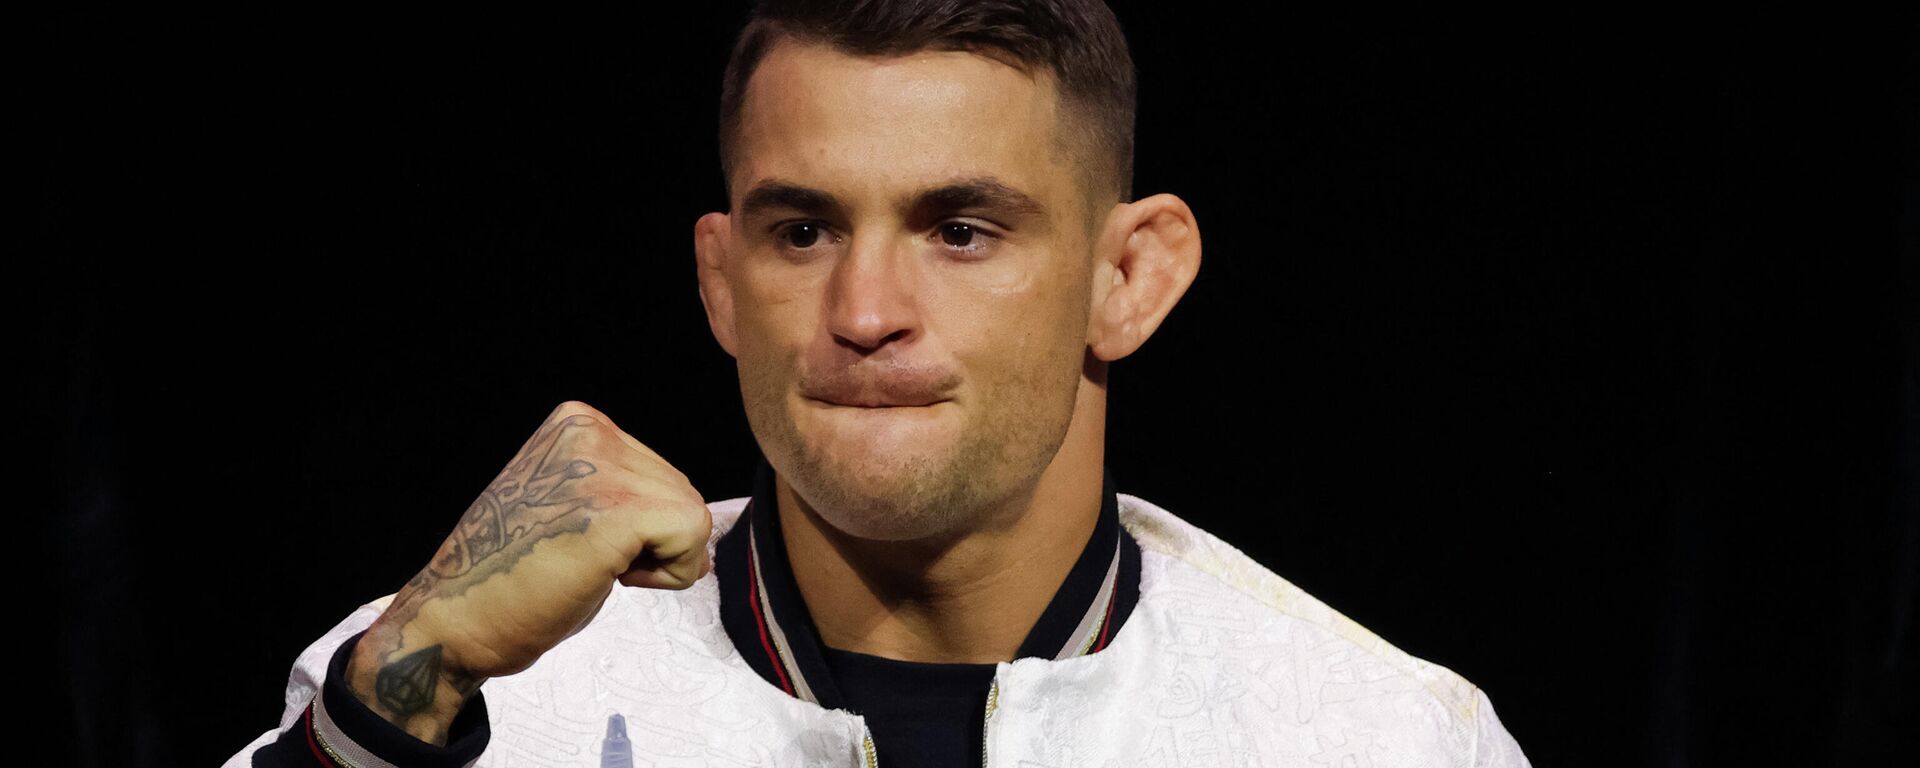 Dustin Poirier is seen on stage during the UFC 269 press conference at MGM Grand Garden Arena on December 09, 2021 in Las Vegas, Nevada. - Sputnik International, 1920, 10.12.2021